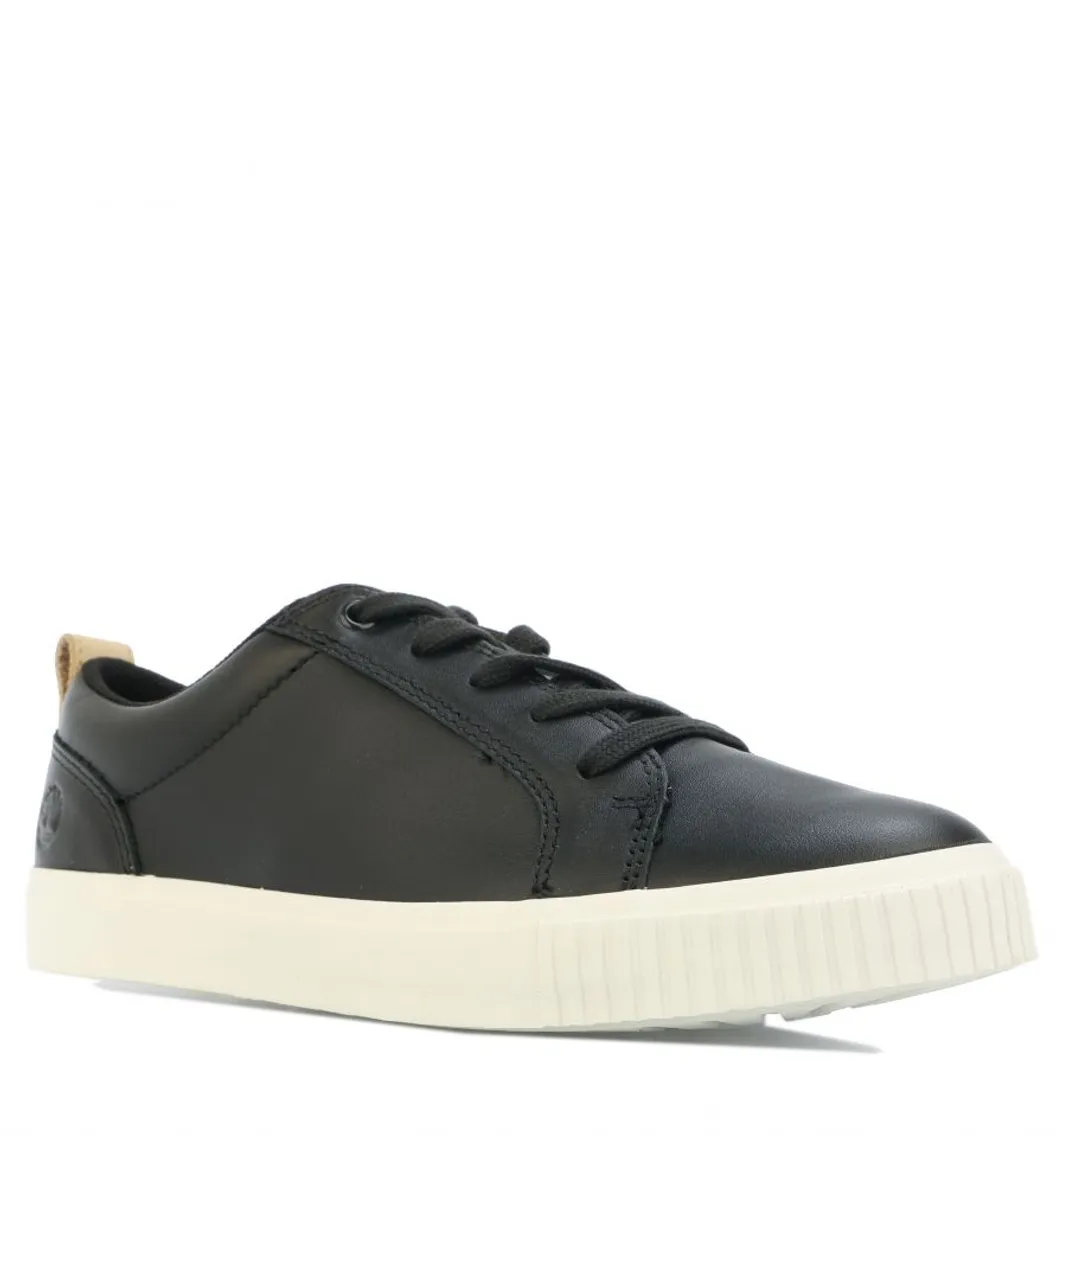 Timberland Womenss Newport Bay Leather Oxford Trainers in Black Leather (archived)